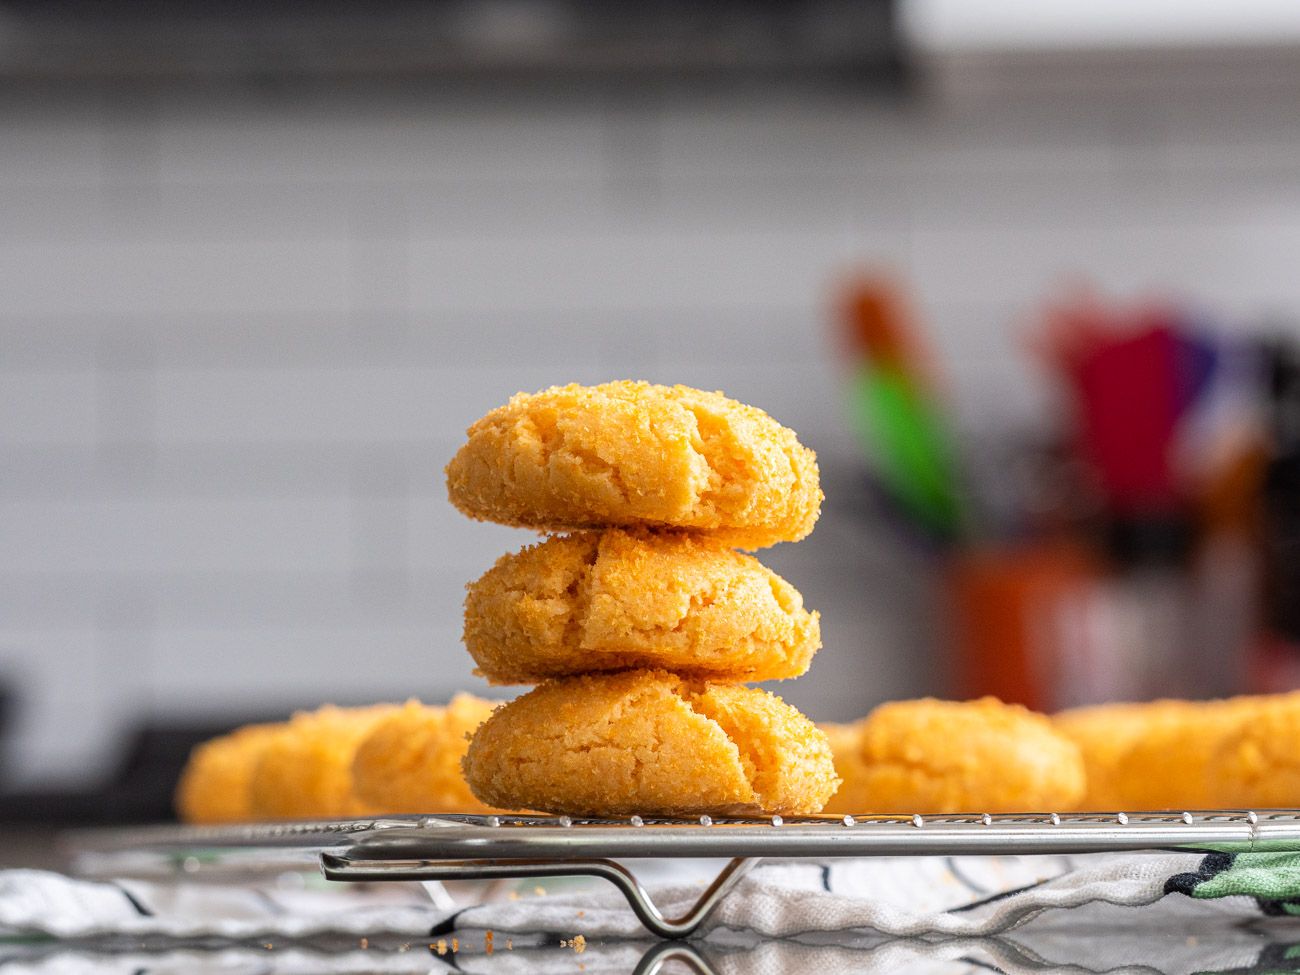 Cheetos cookies stacked up